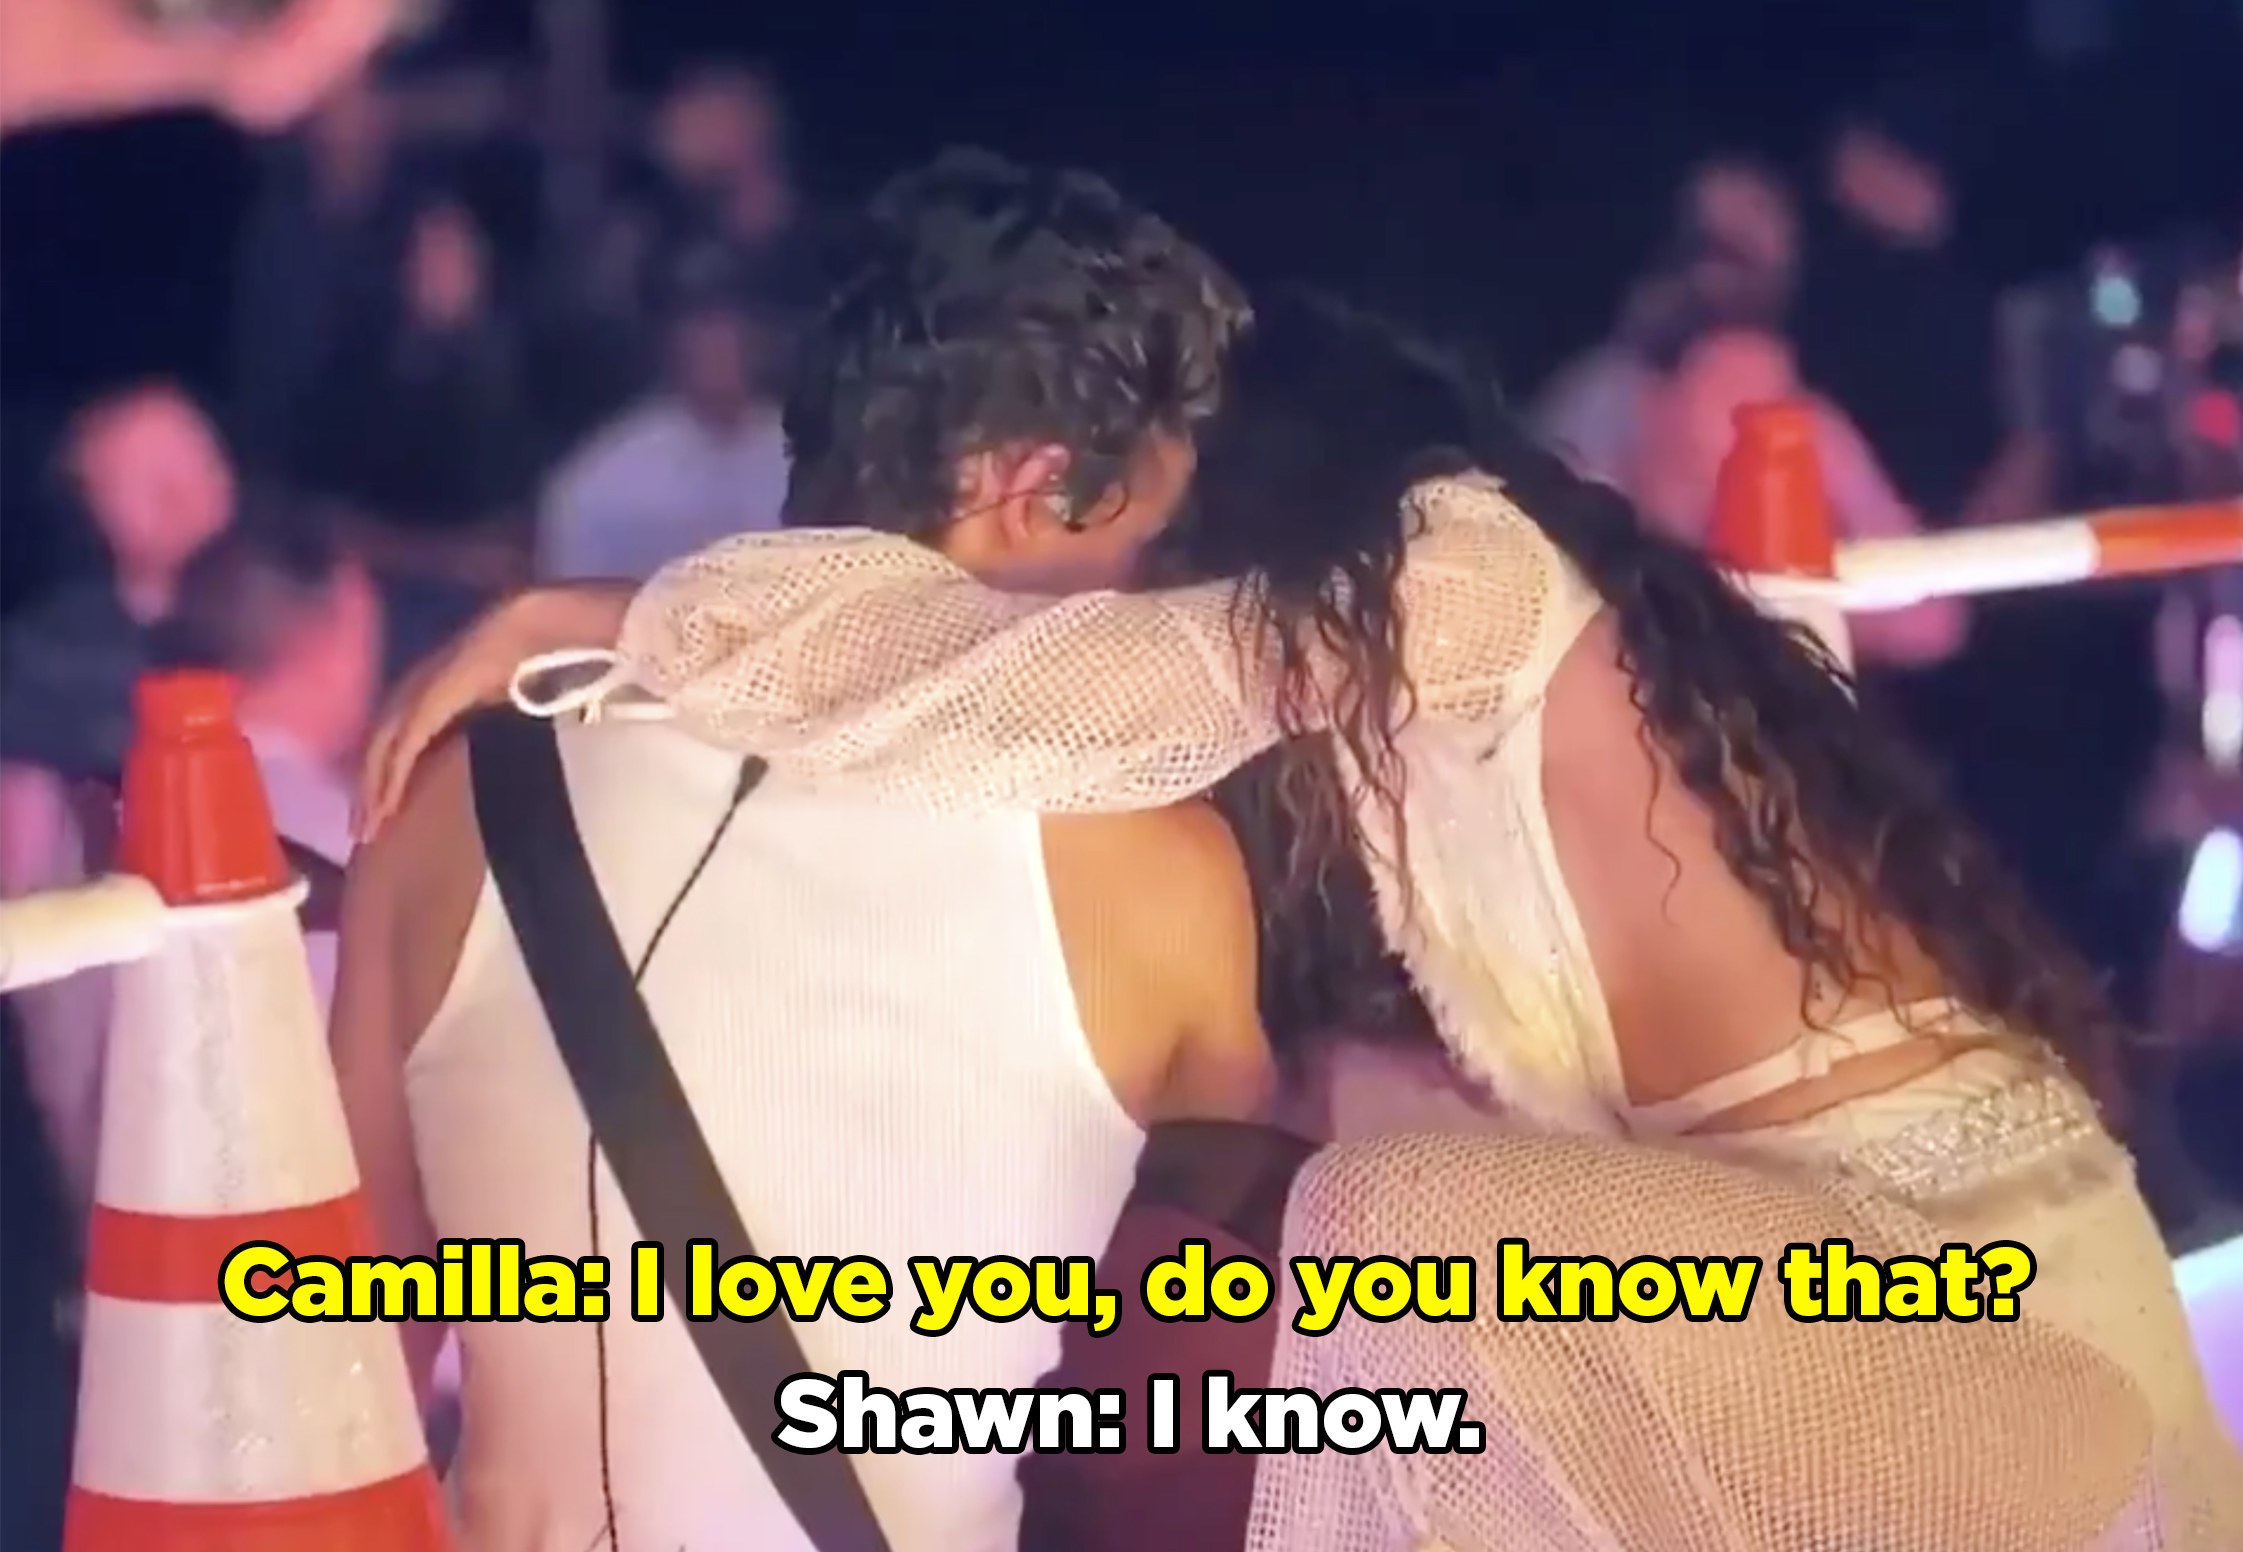 Camilla asking Shawn if he knows that she loves him and he replies that he does